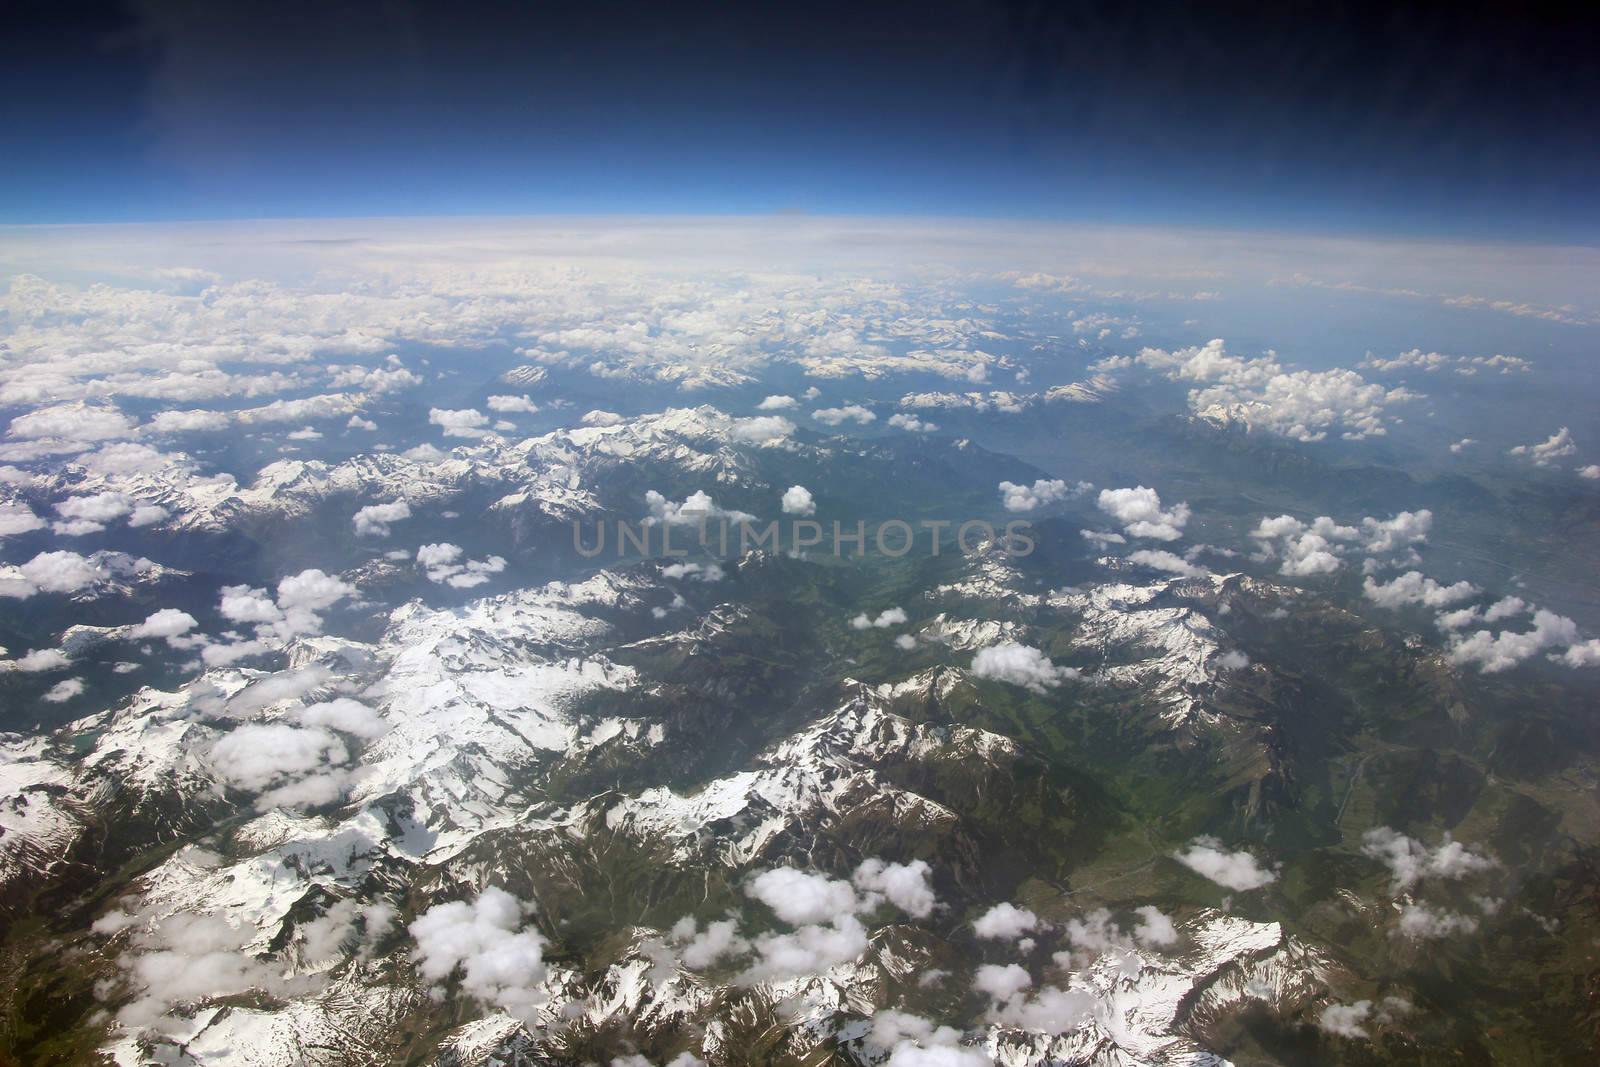 Switzerland and Austria  as seen from an airplane window by Flik47